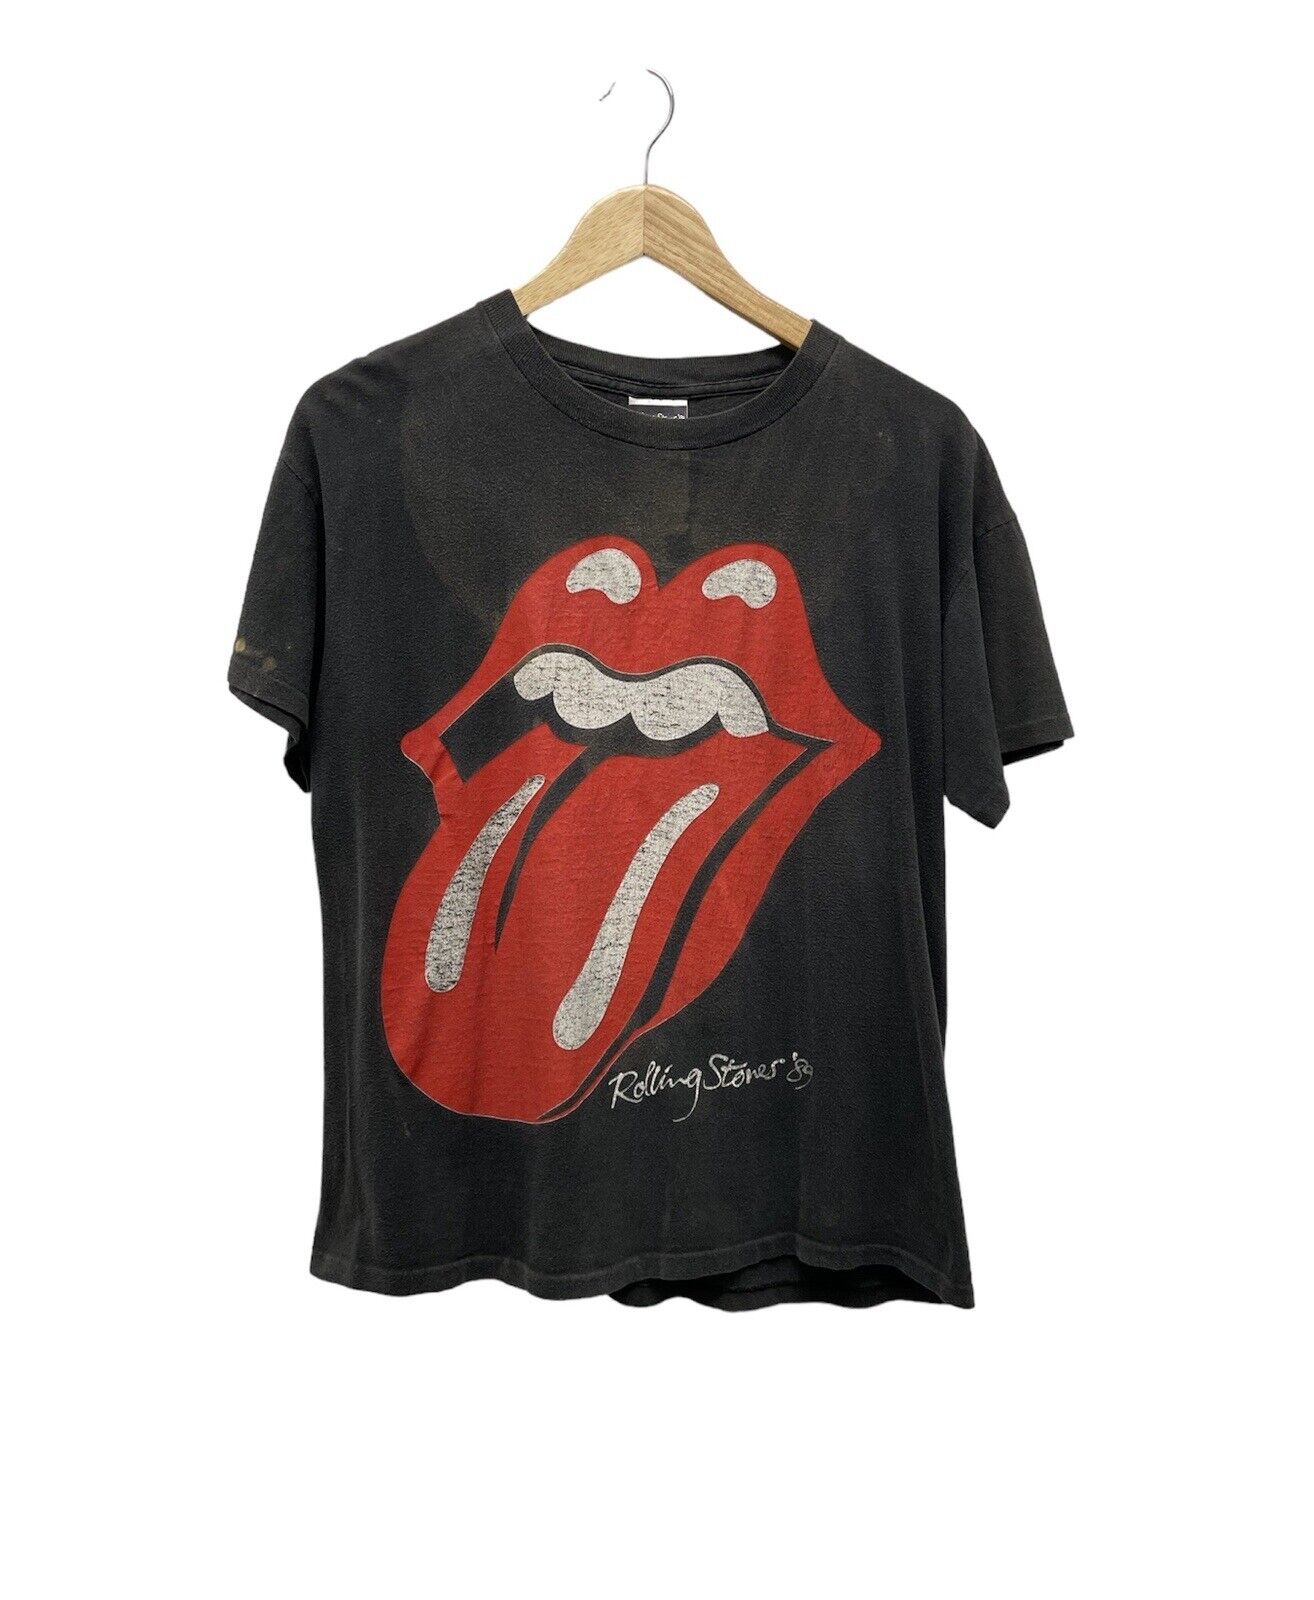 Vintage The Rolling Stones North American Tour Tee - image 1